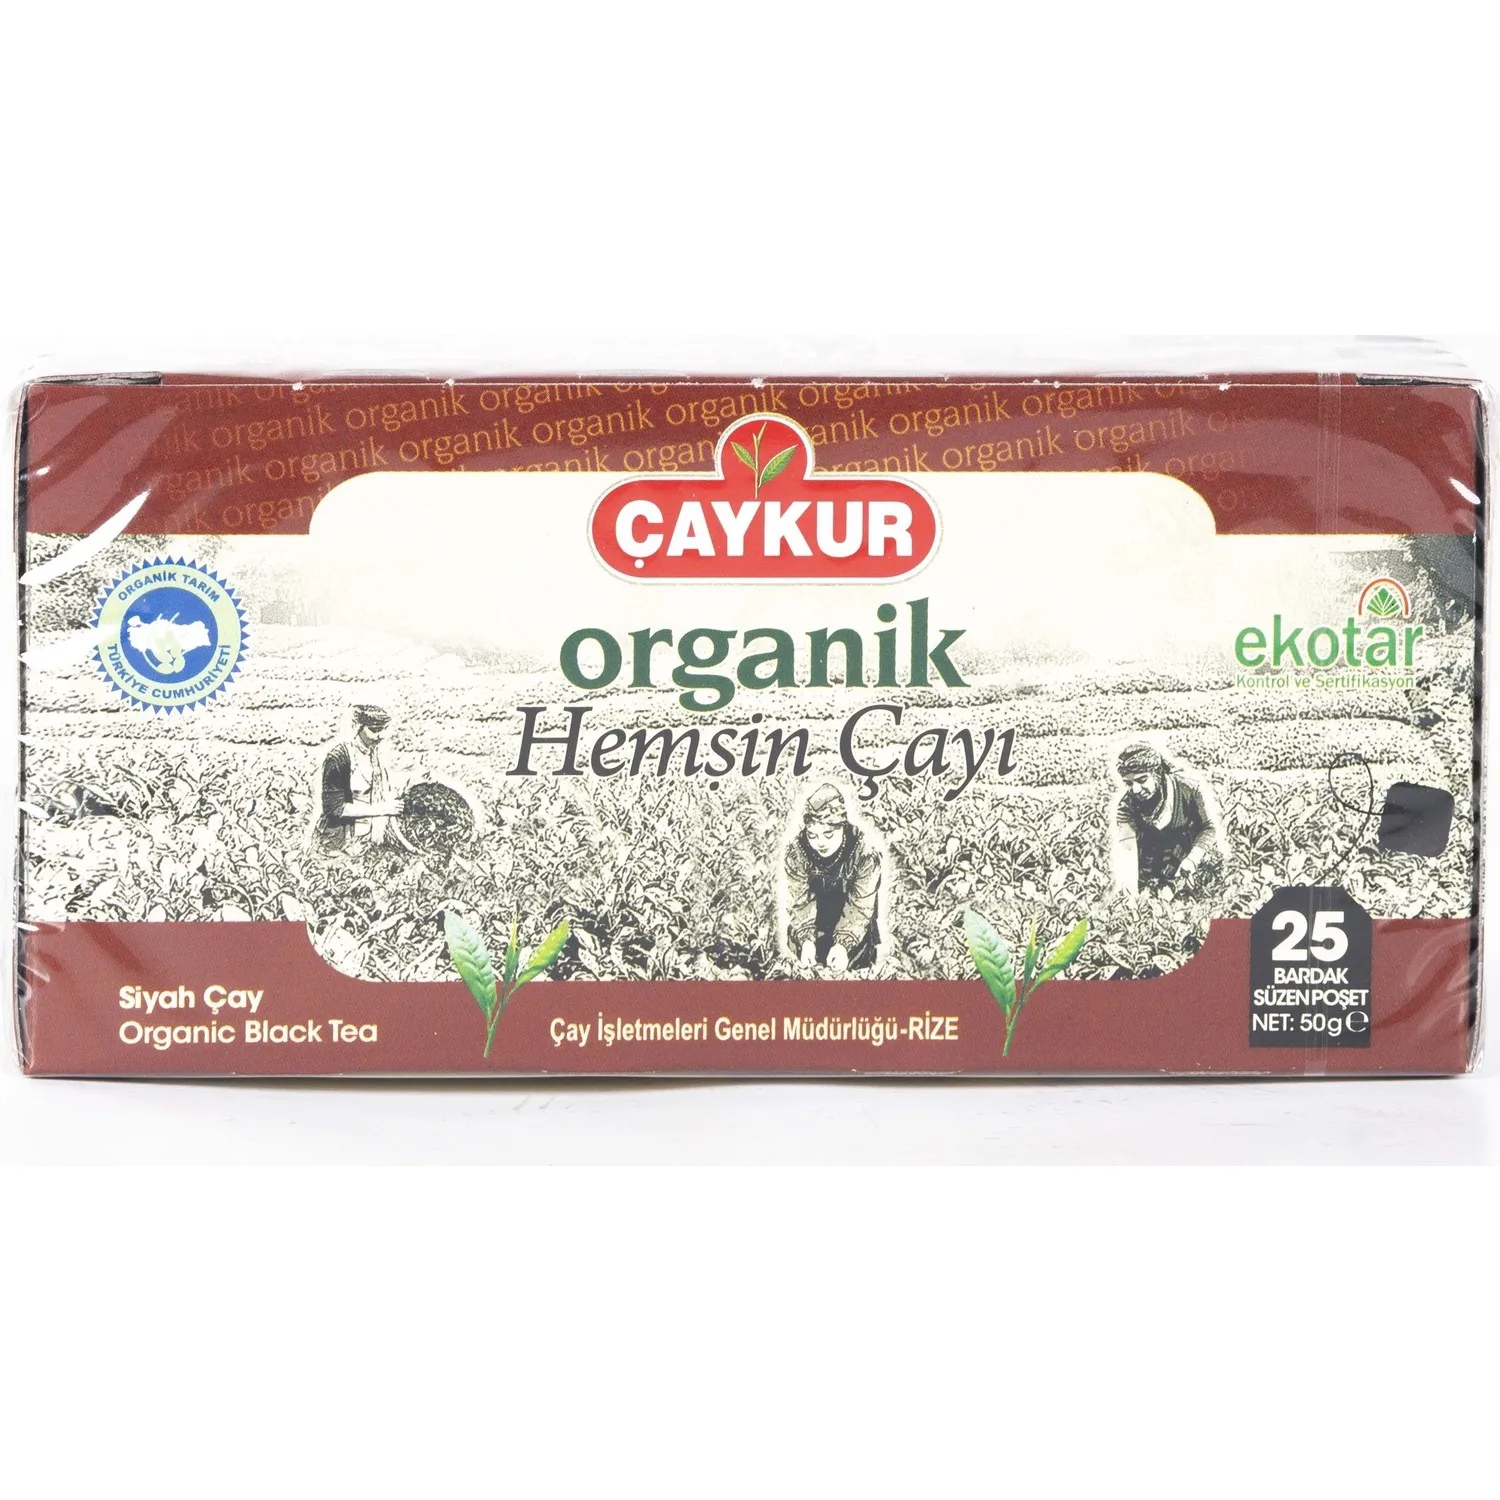 

Çaykur Organic Hemşin Tea, with its PERFECT TASTE AND ITS PERFECT DRINK, Strained Glass Bag 25 Pack 50 Gr FREE SHİPPİNG